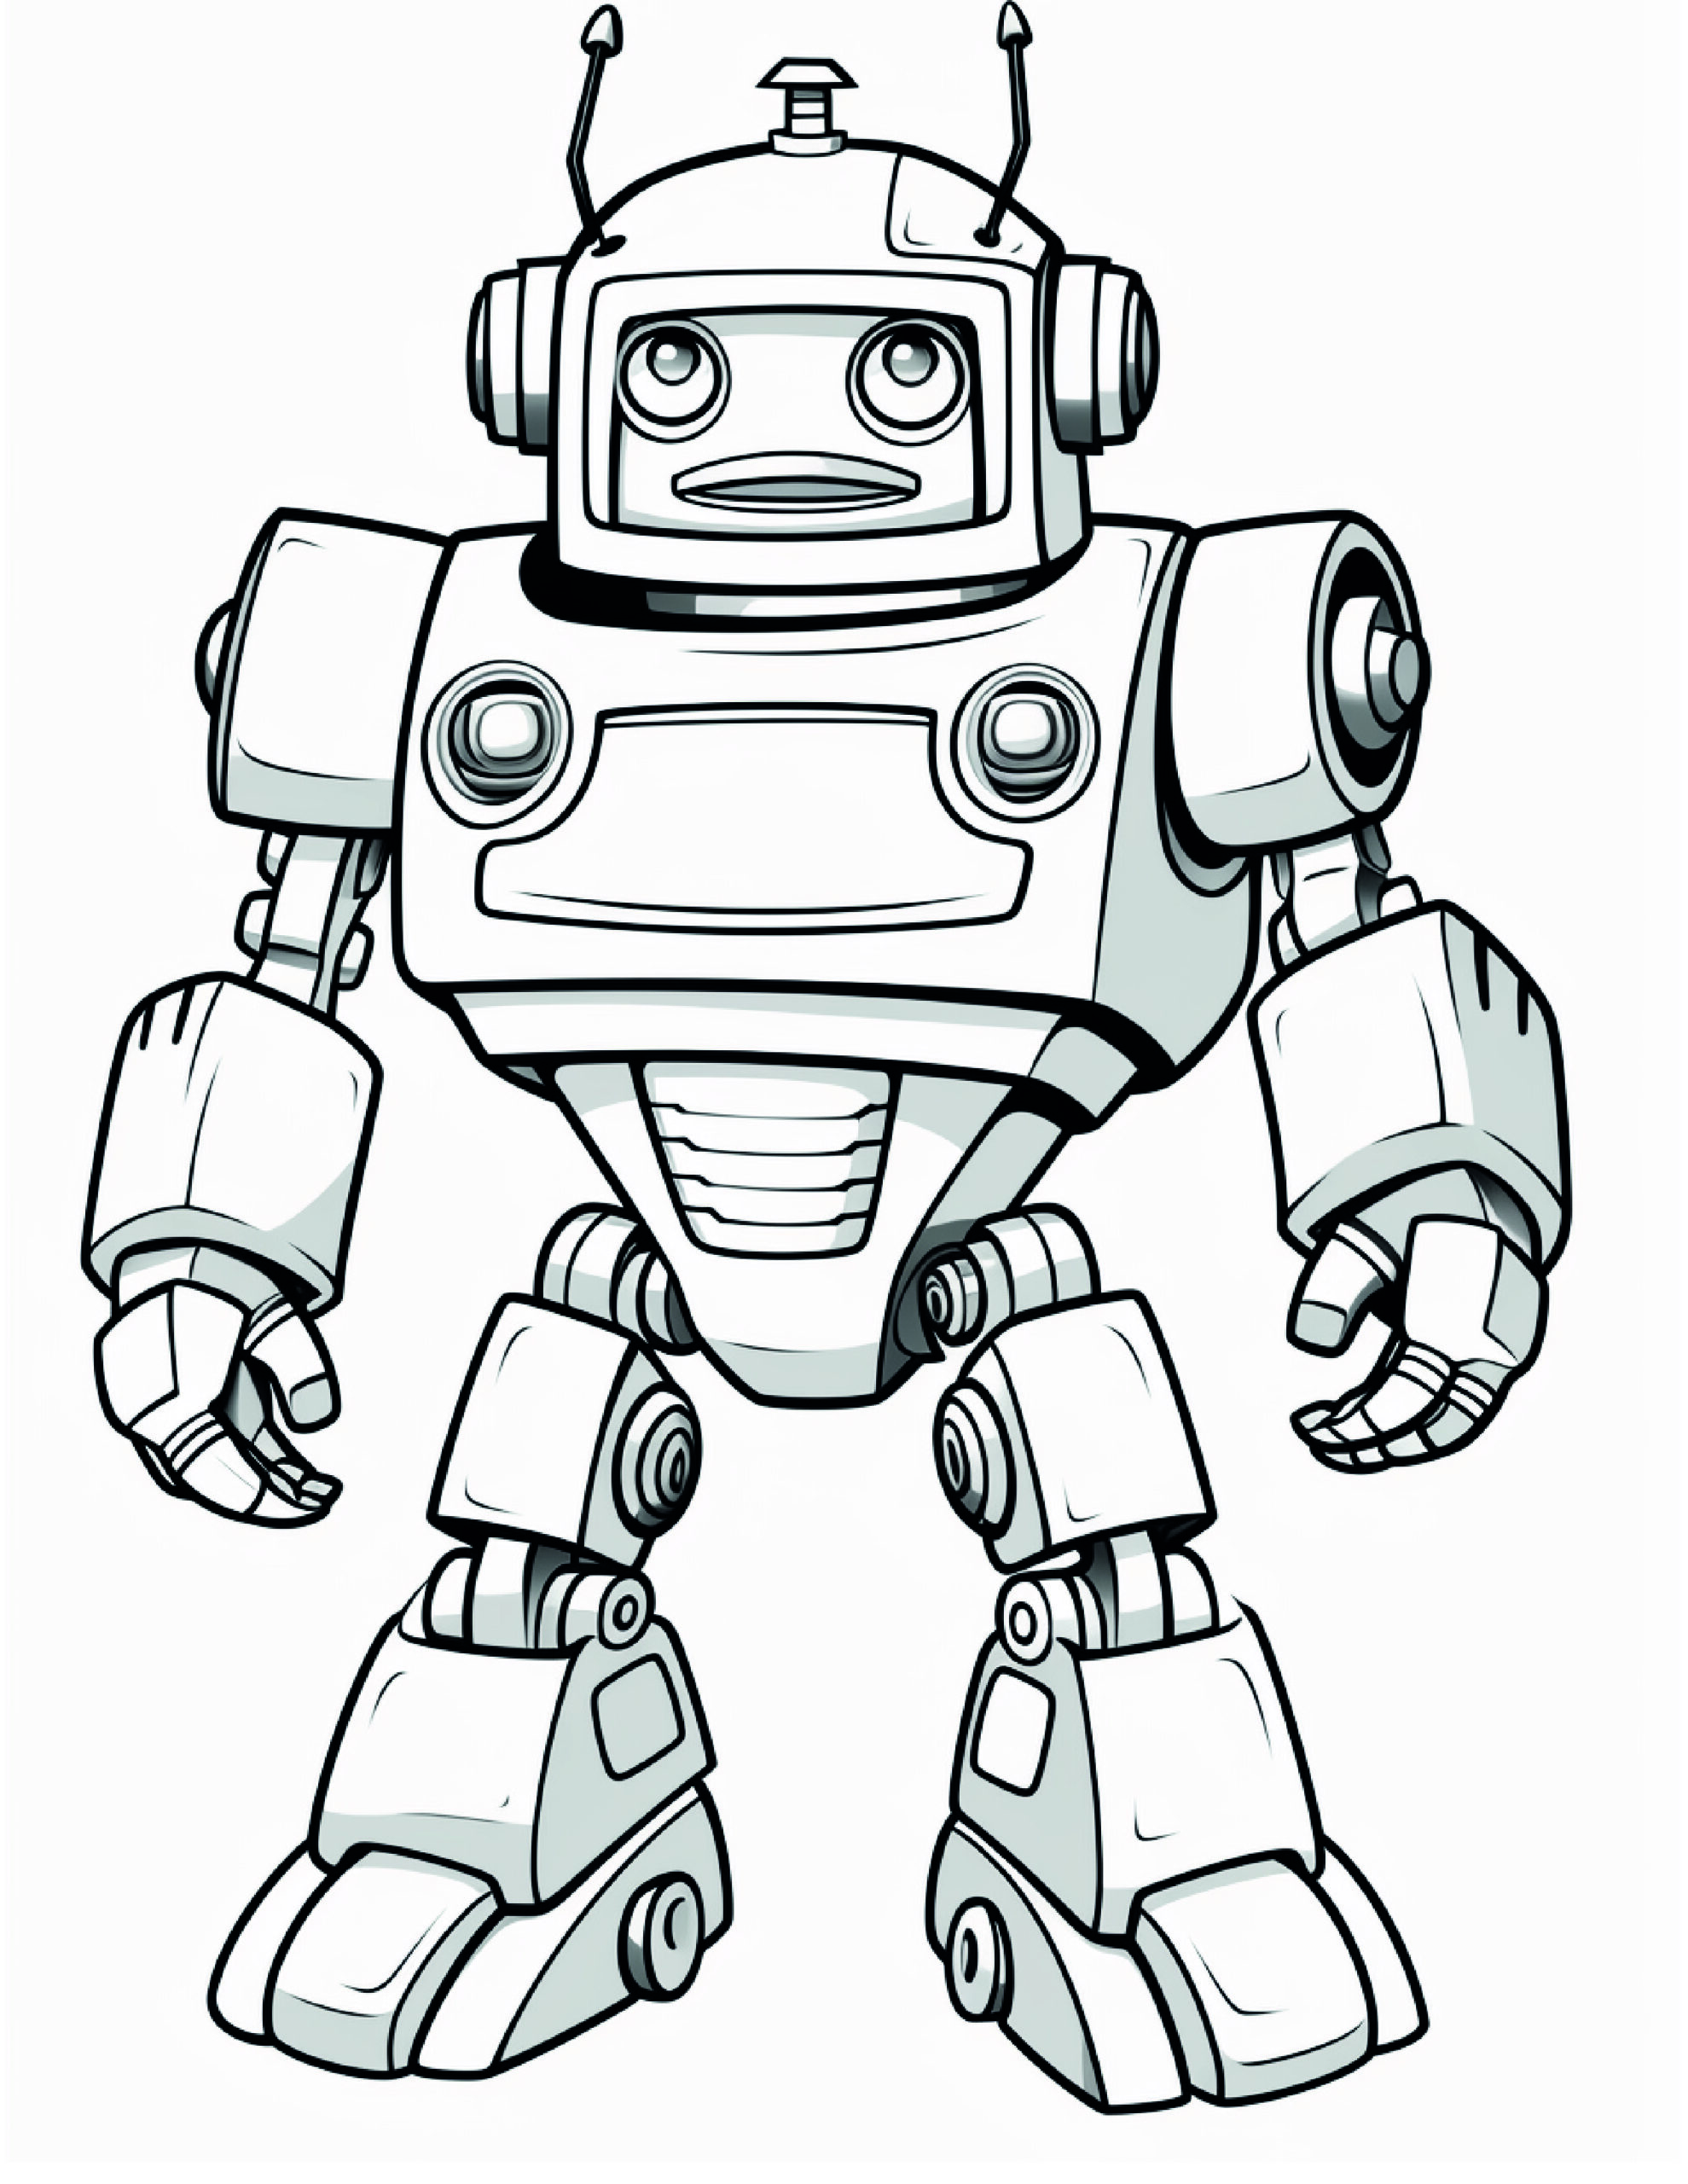 Robot Coloring Page 16 - A line drawing of a tall robot. 